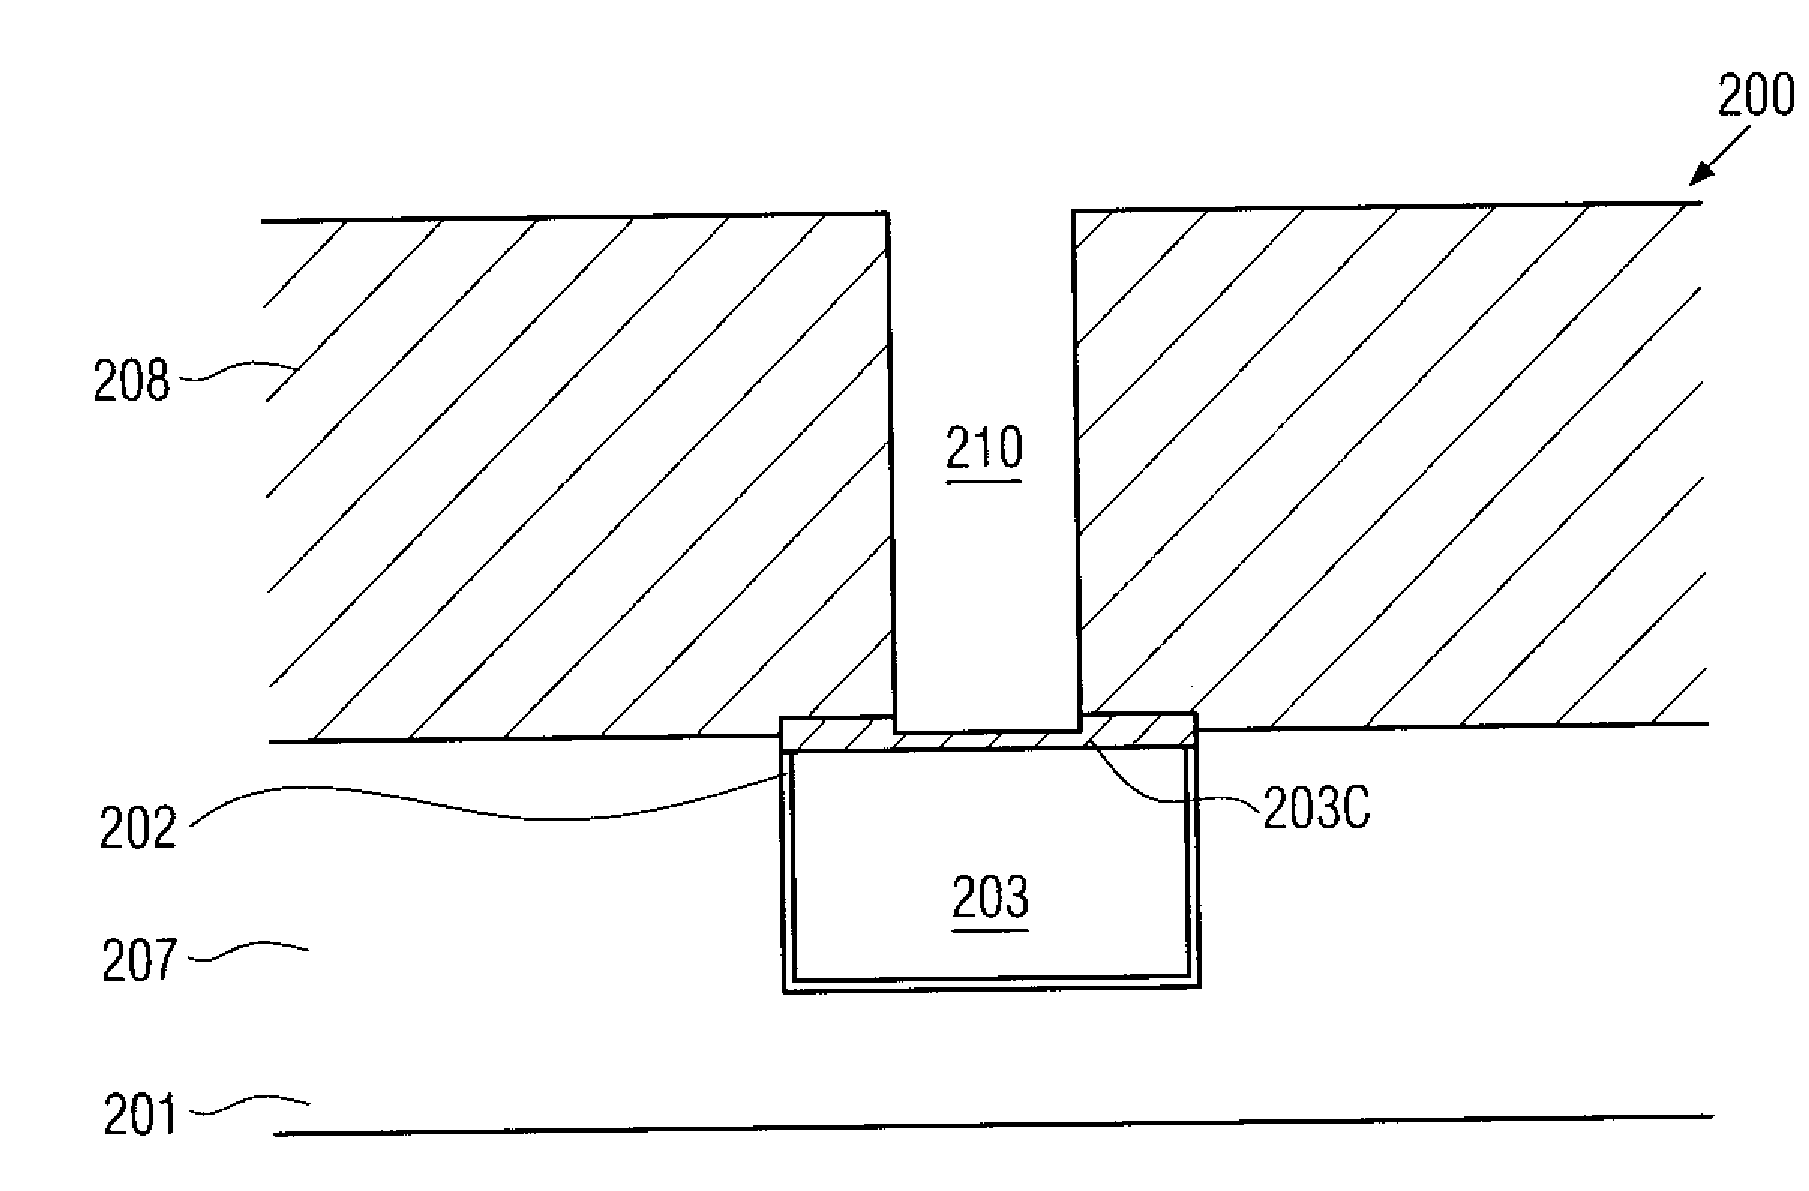 A semiconductor device comprising a copper alloy as a barrier layer in a copper metallization layer